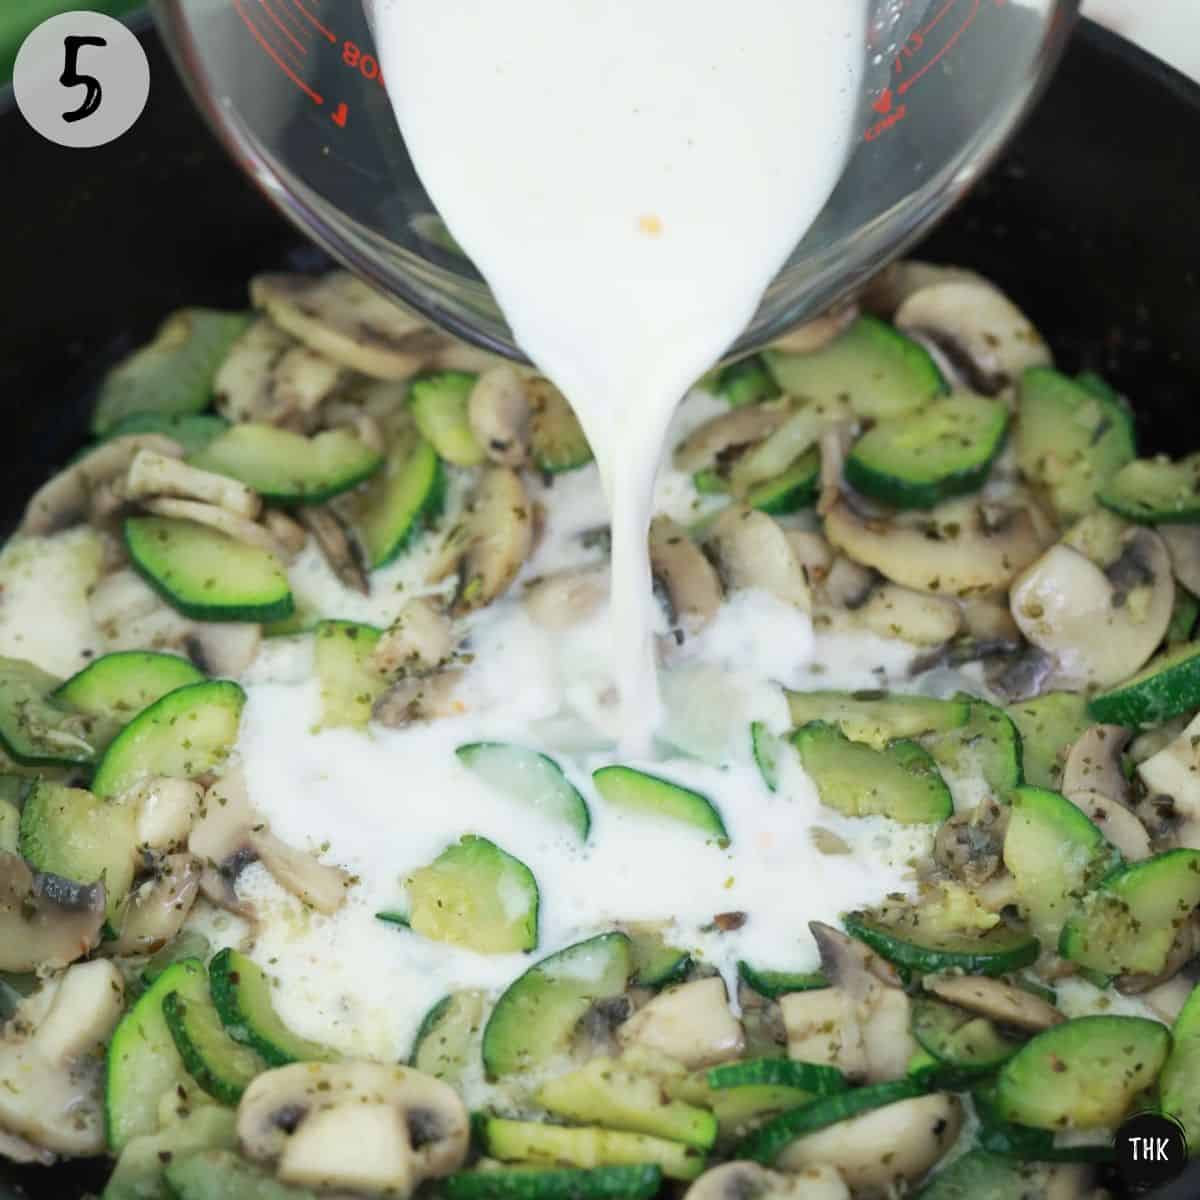 Milk mixture being poured on top of sautéed vegetables.